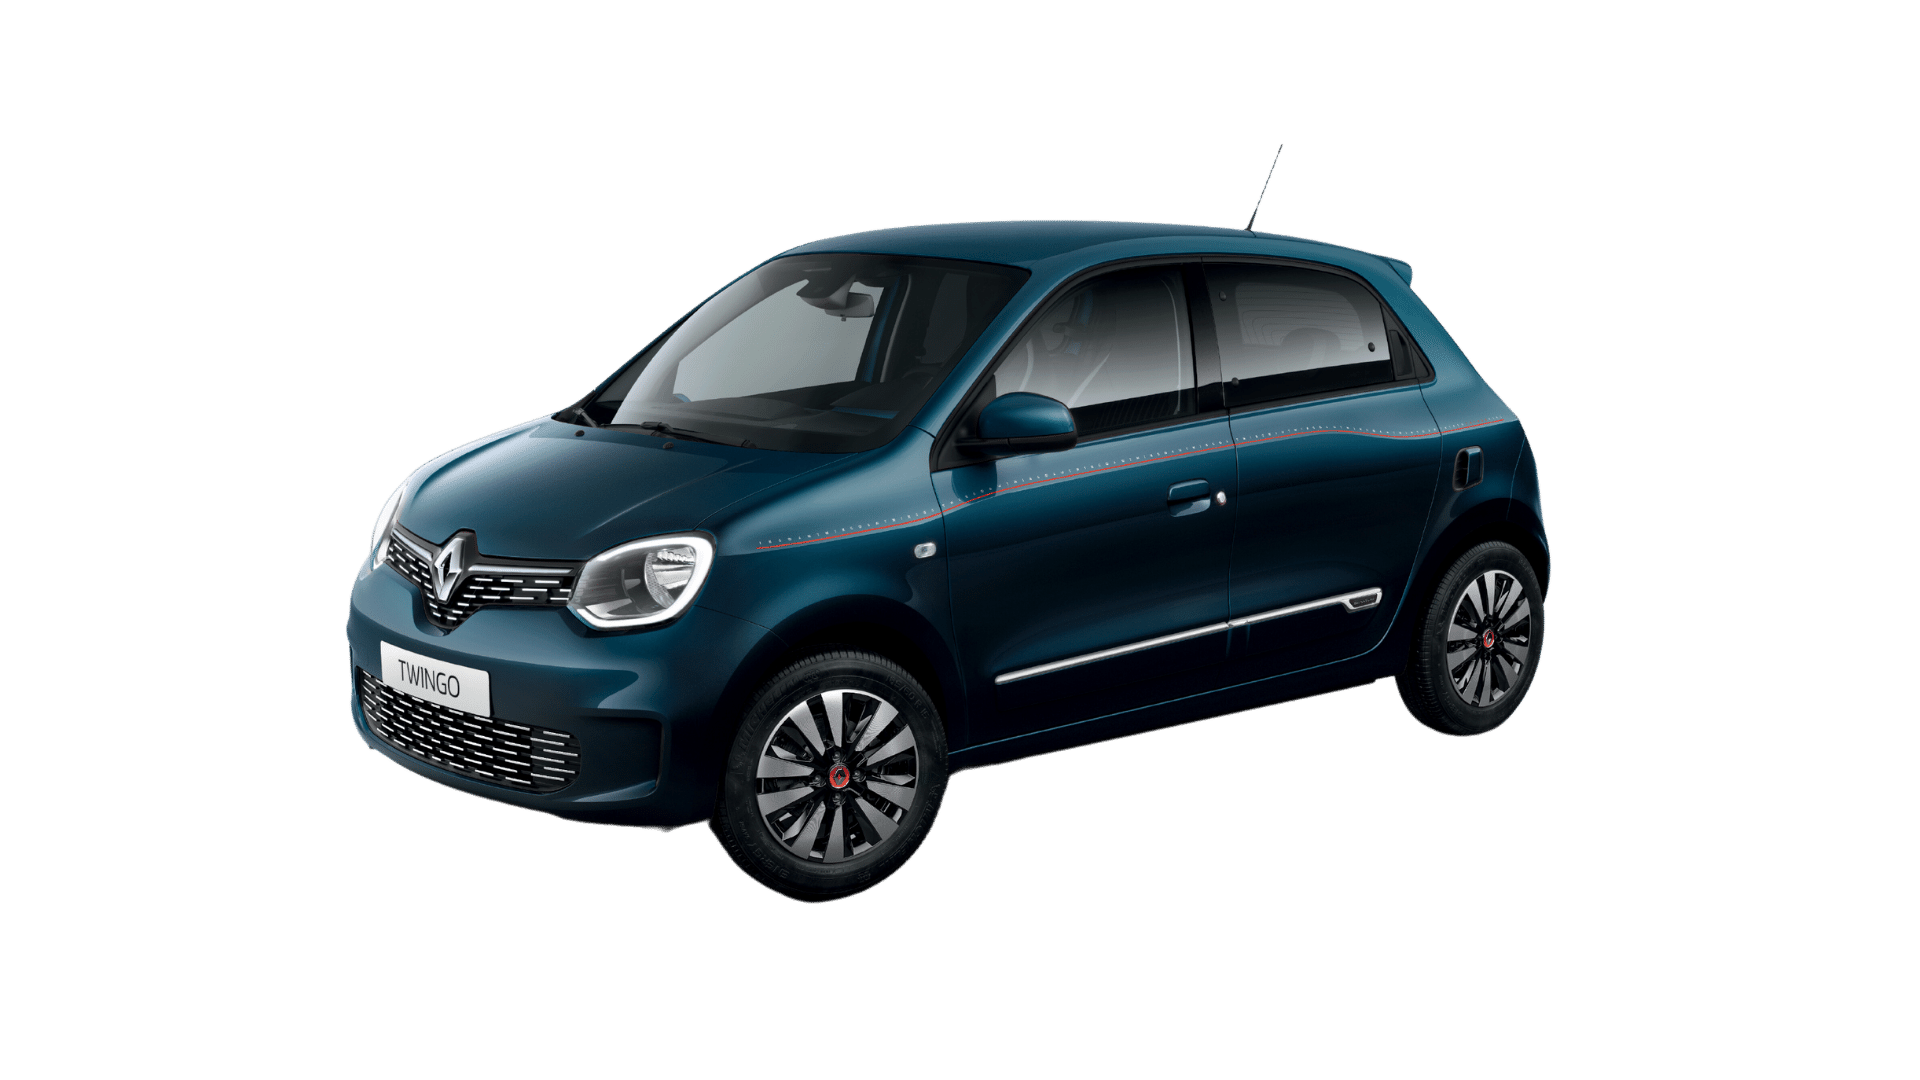 Renault Twingo E-Tech charging cable